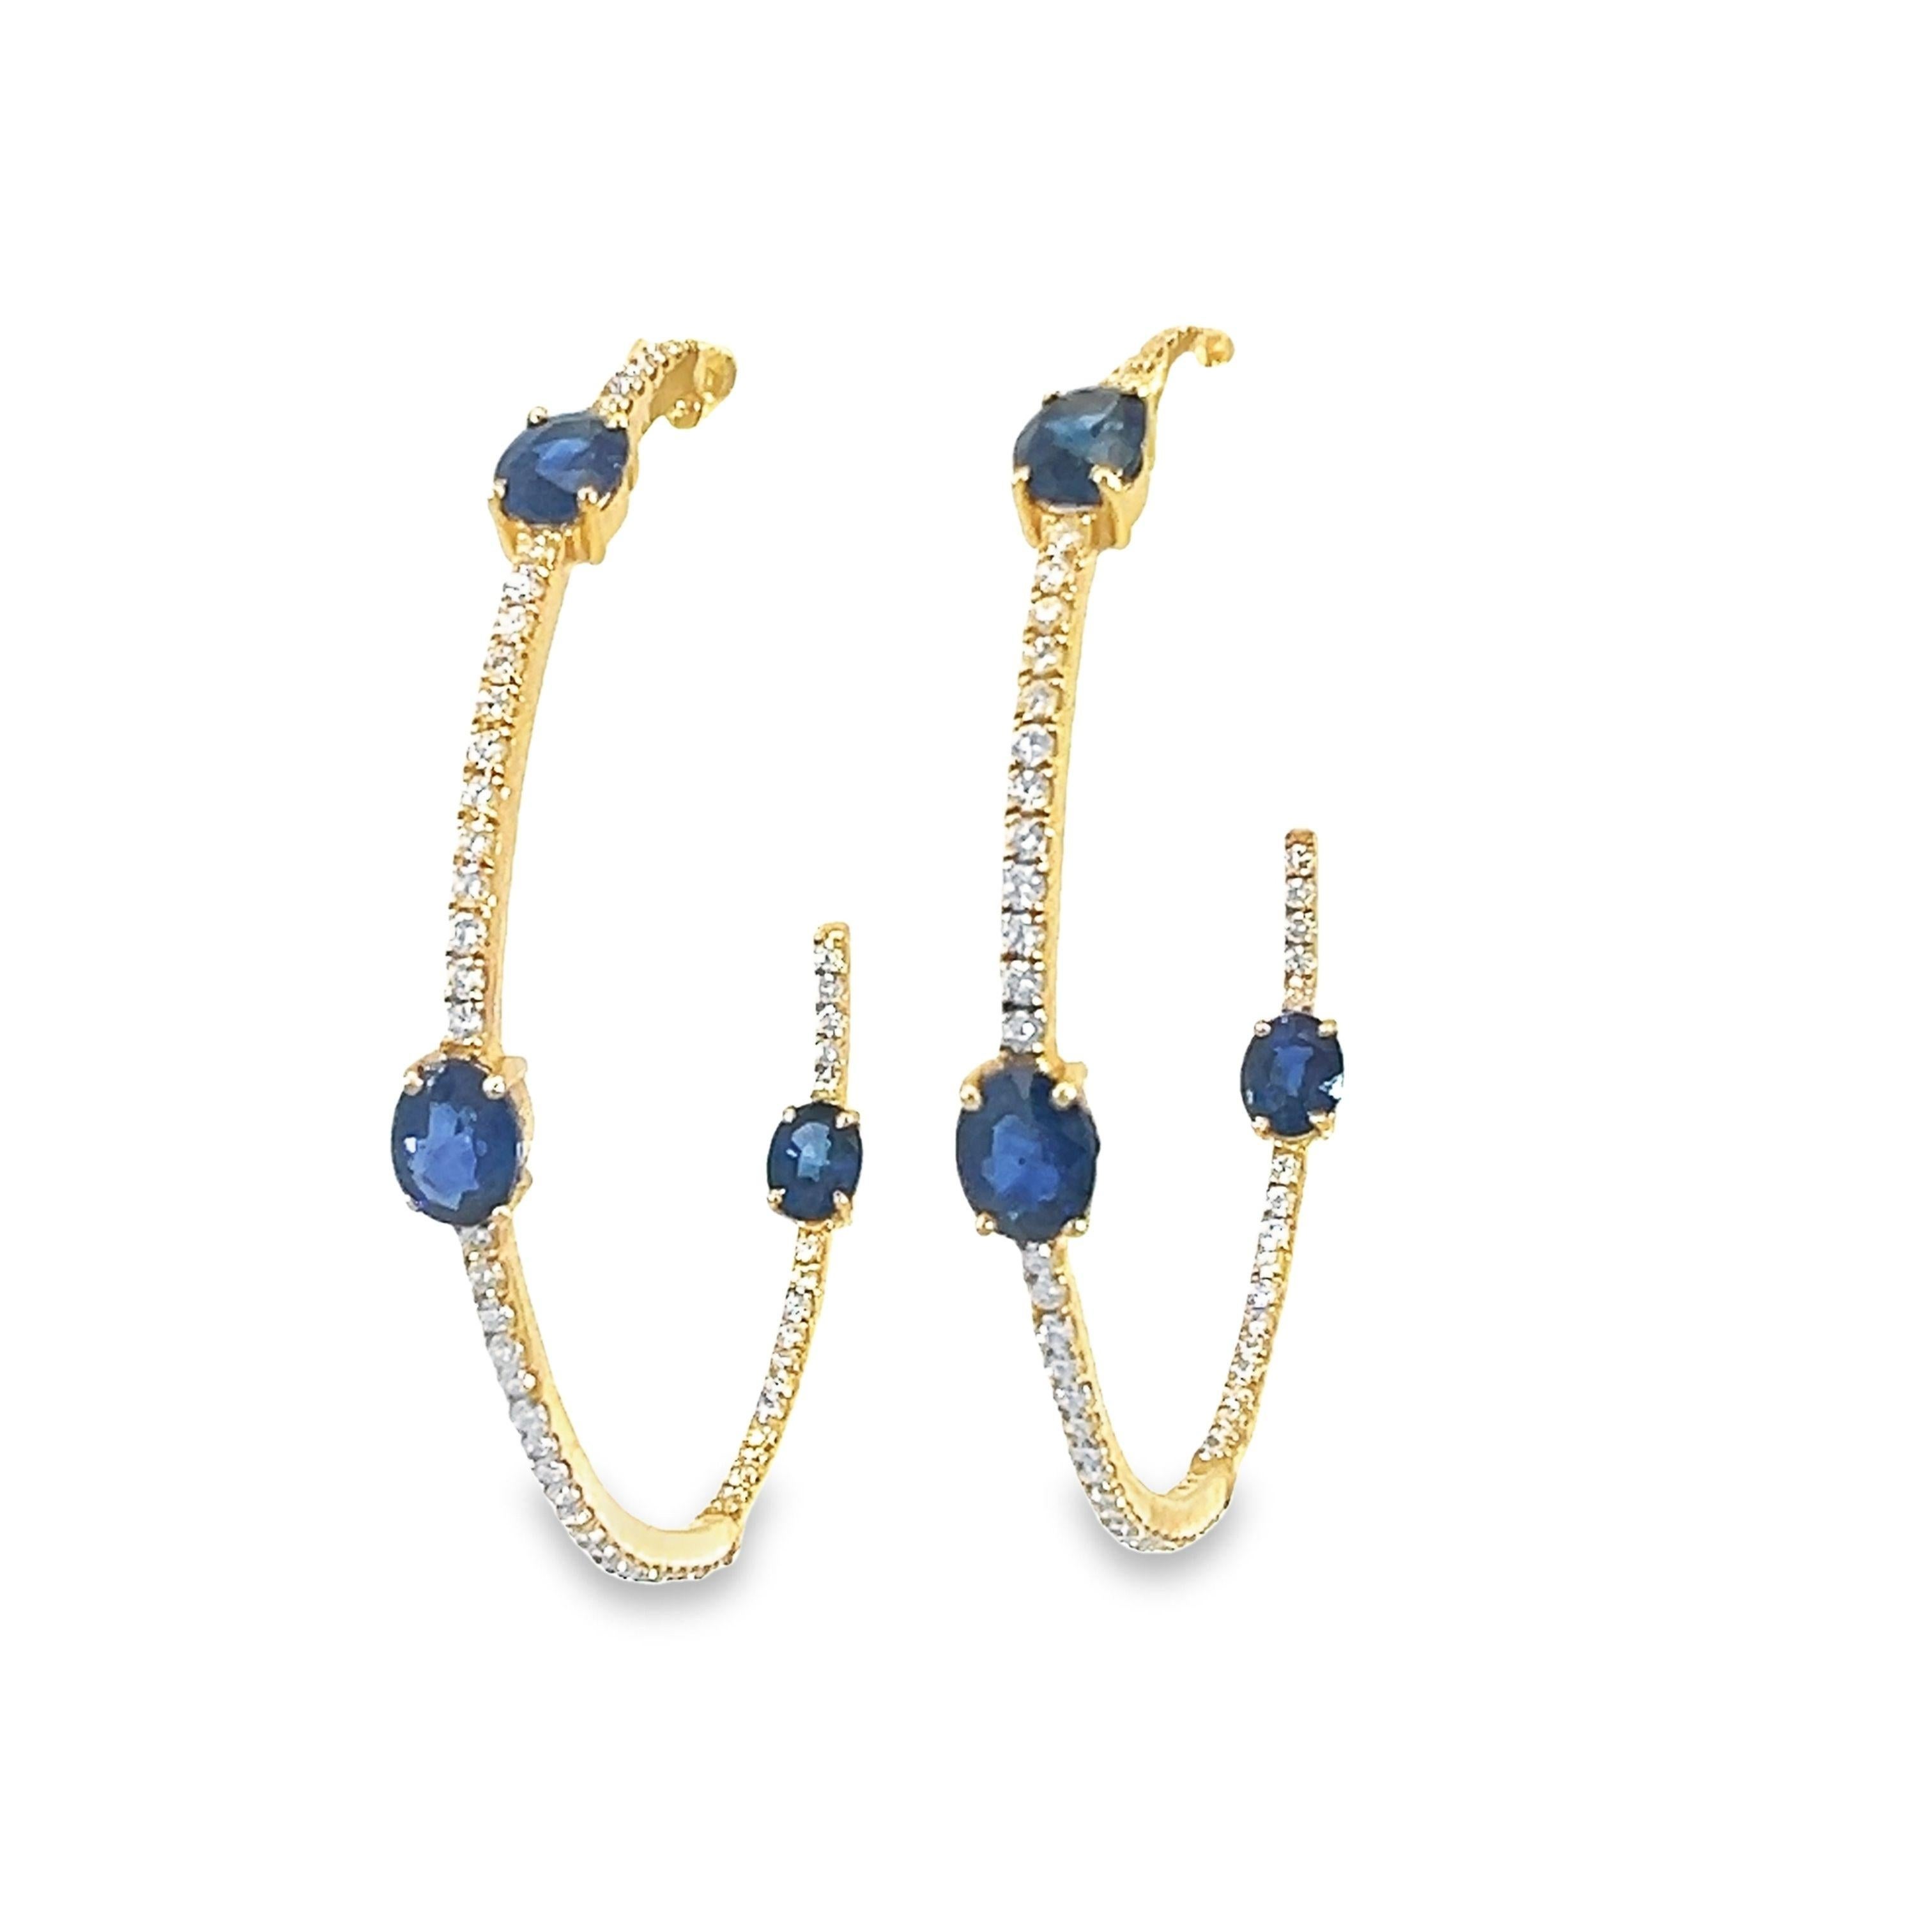 A stunning pair of 18-karat yellow gold hoops earrings with a 2.74-carat natural blue sapphire and 0.81-carat diamonds. 
An element of elegance added to any ensemble with these earrings, featuring deep blue sapphires set in an effective design with